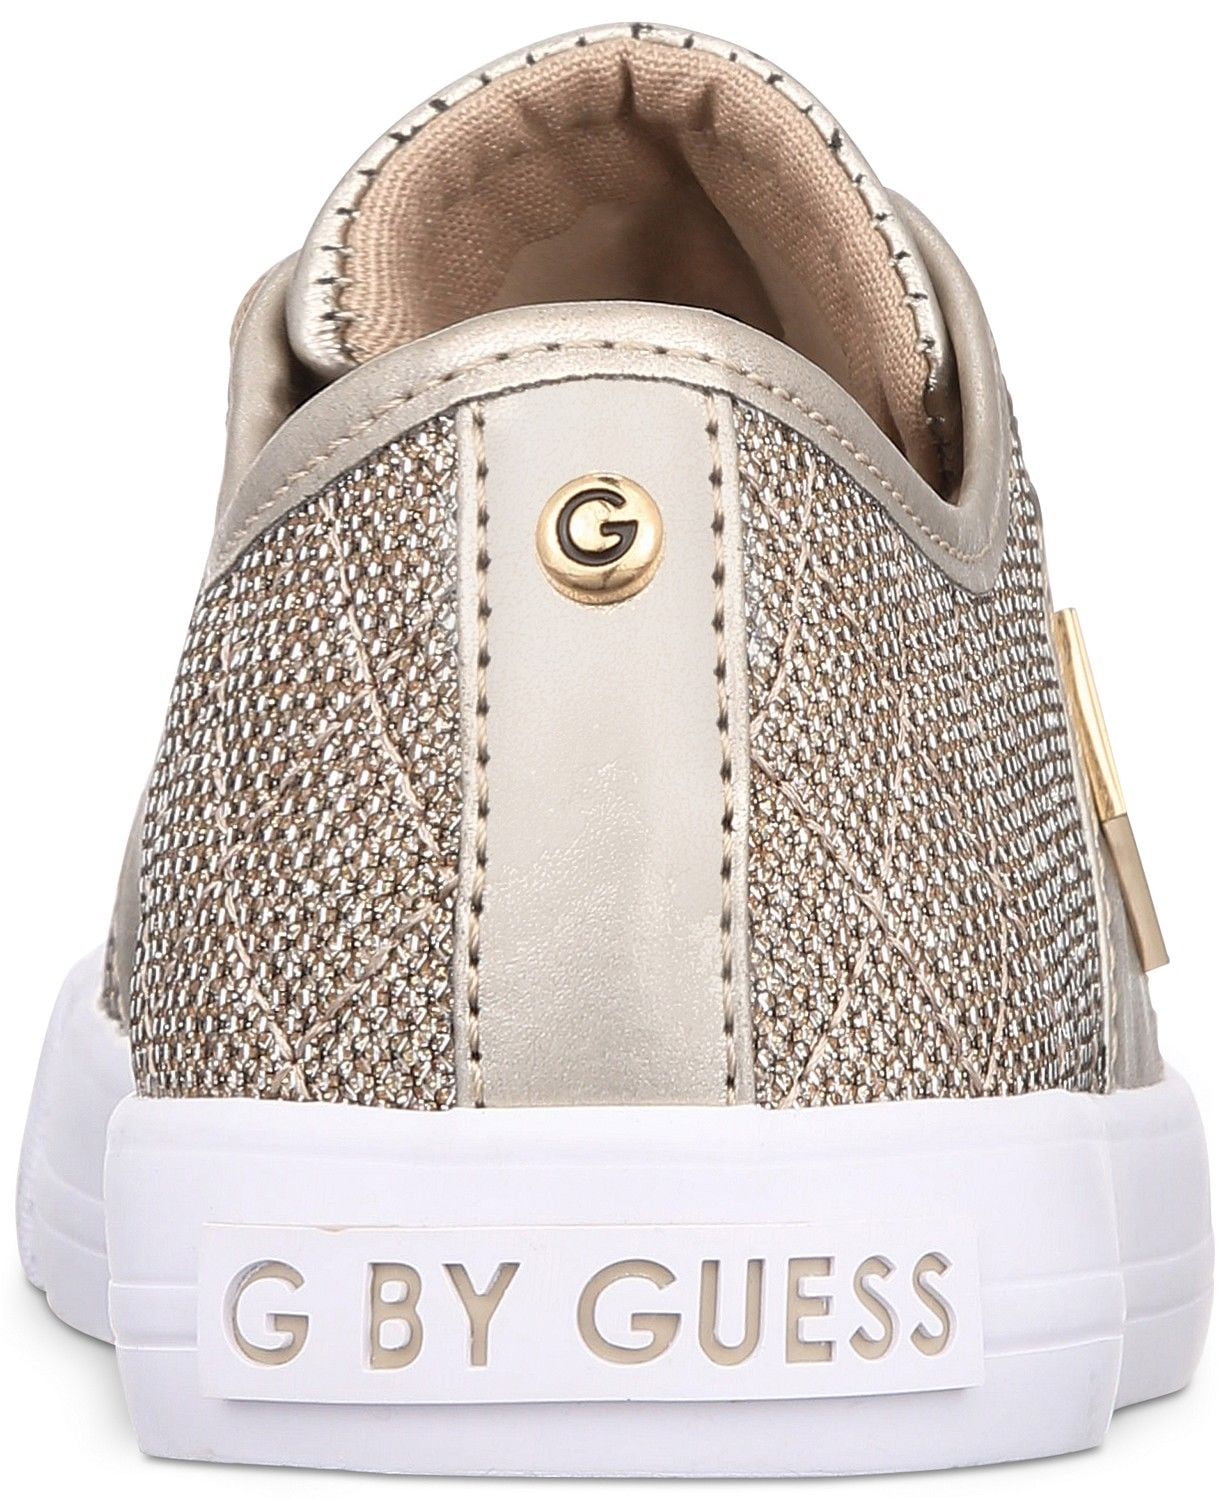 Traditie dichters Bek G by Guess Women's Lace Up Leather Quilted Fabric Glitter Sneakers Shoes  Gold (6) - Walmart.com